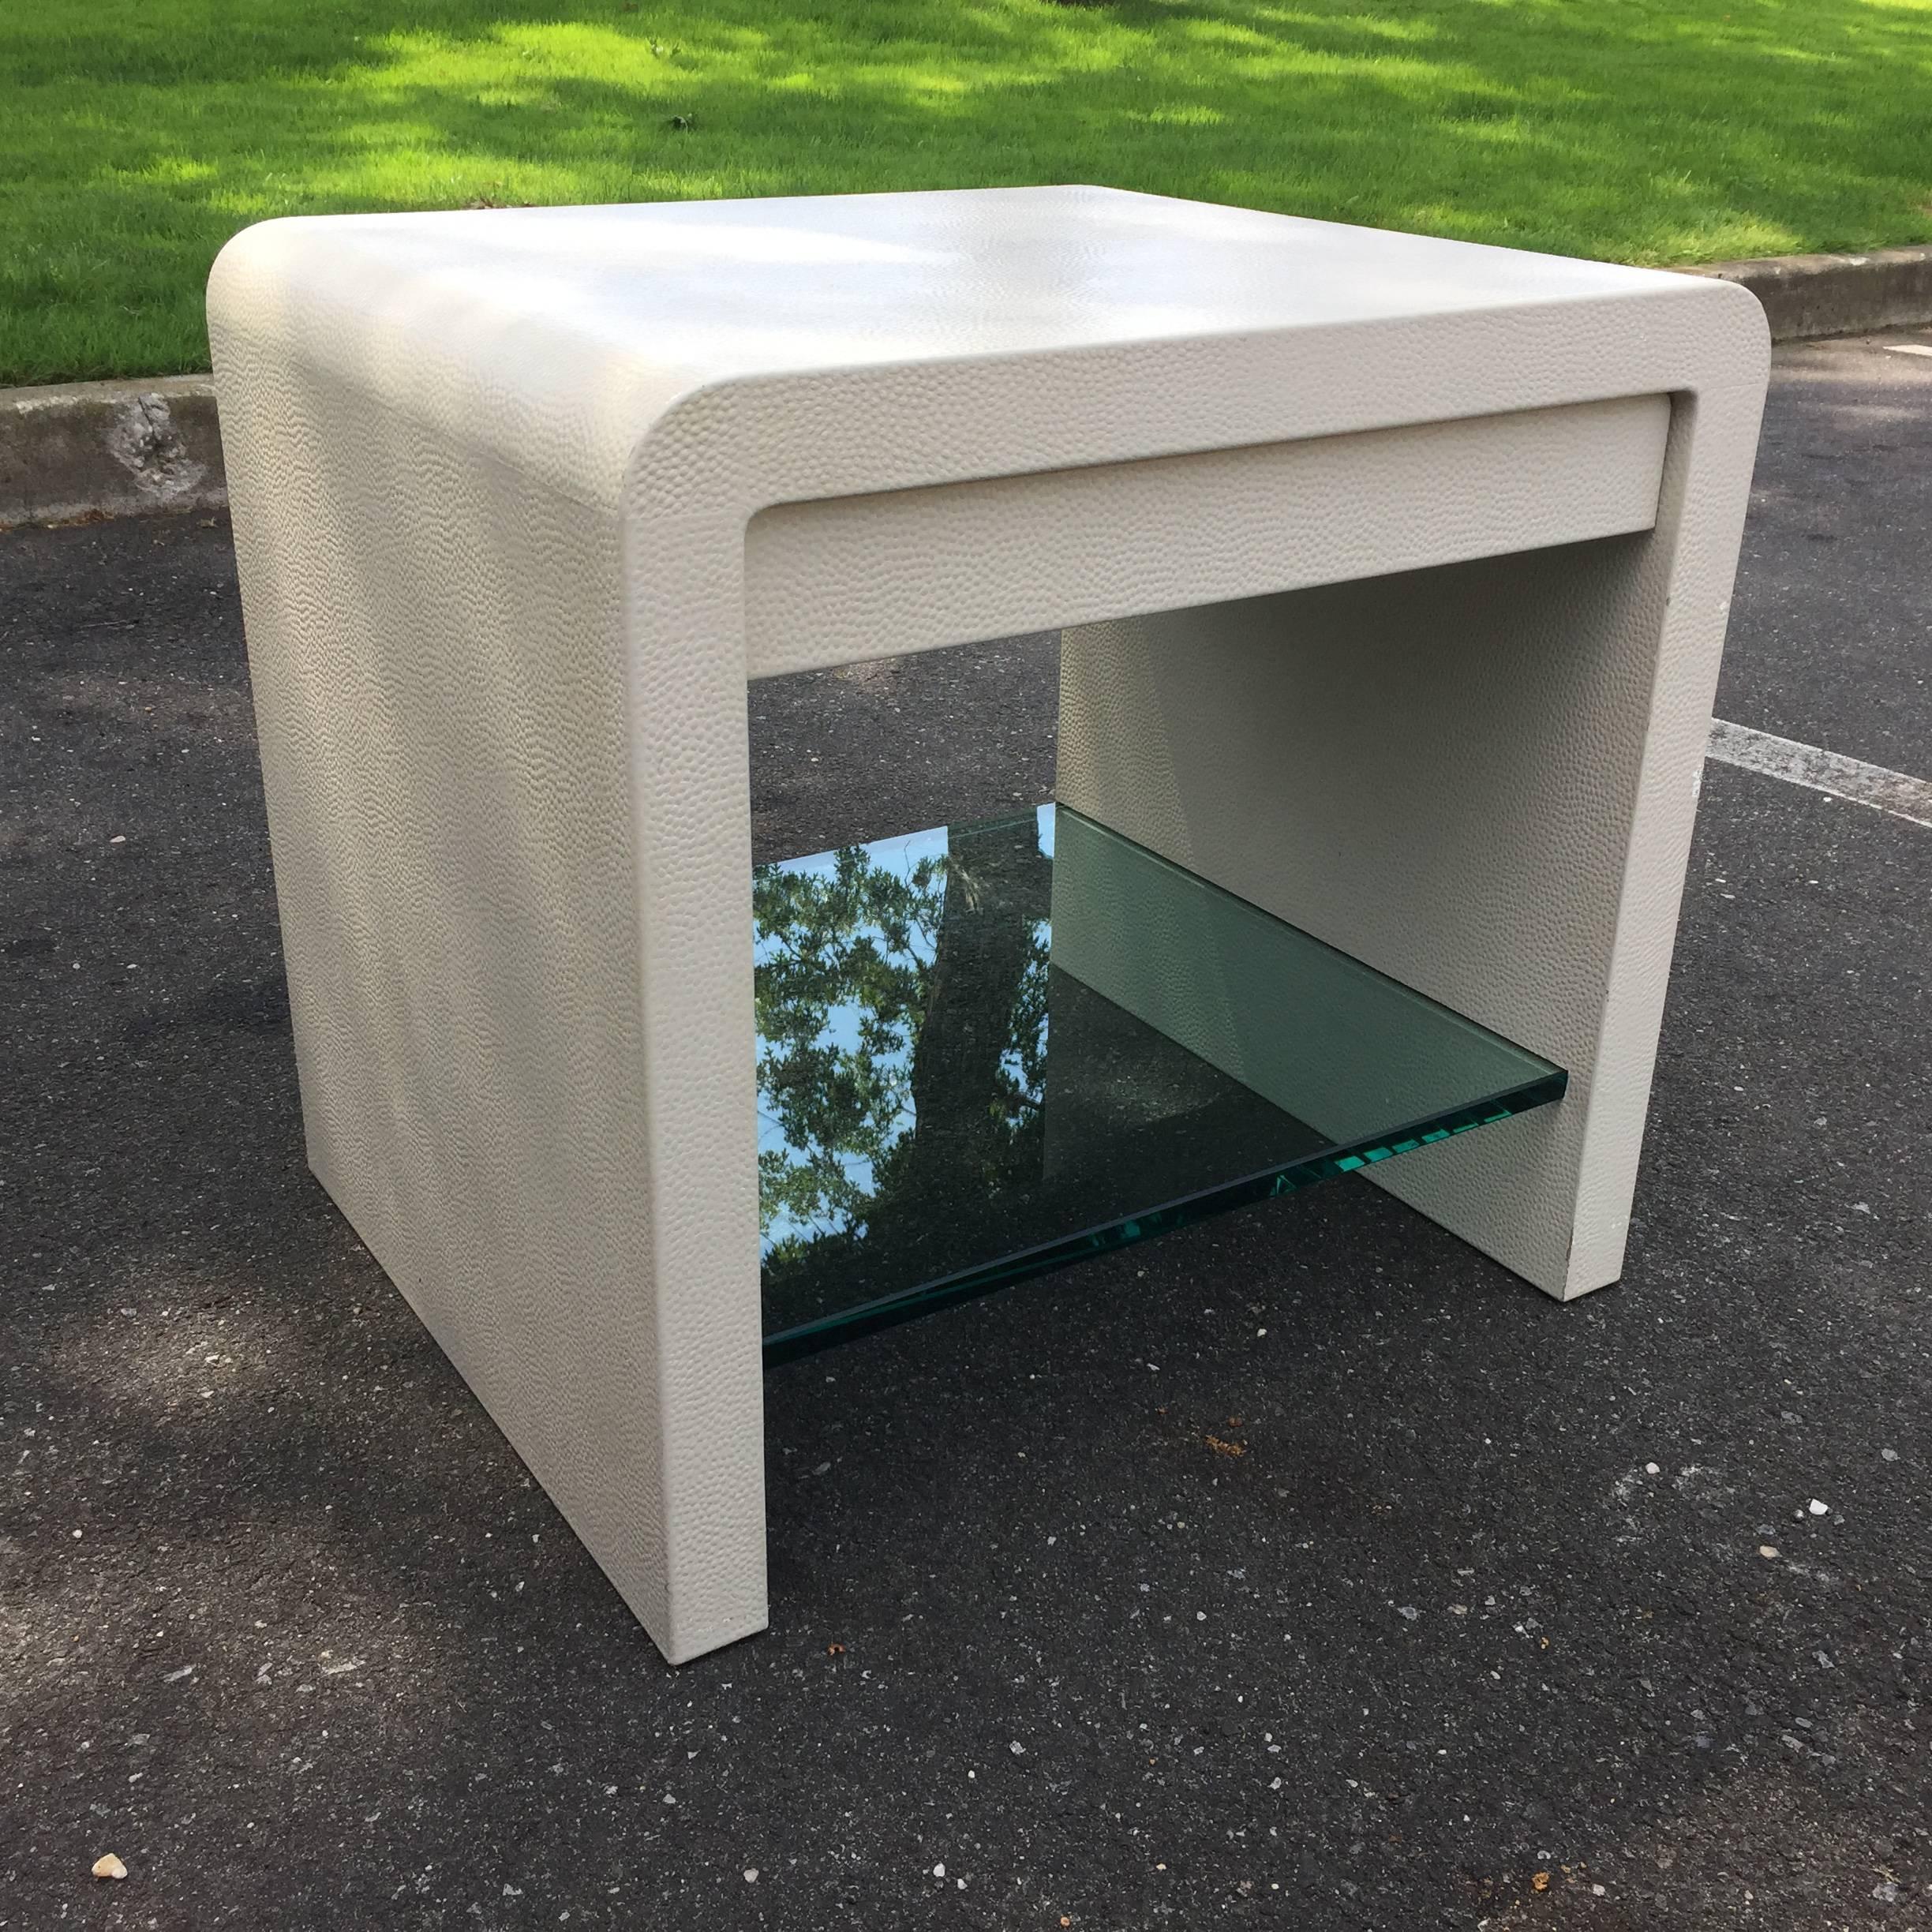 This iconic and rare waterfall design vintage side table by Karl Springer features a recessed drawer and 3/4 inch thick glass shelf (chip to glass on backside - not visible). Can be replaced at additional cost.

Label embossed to underside Karl